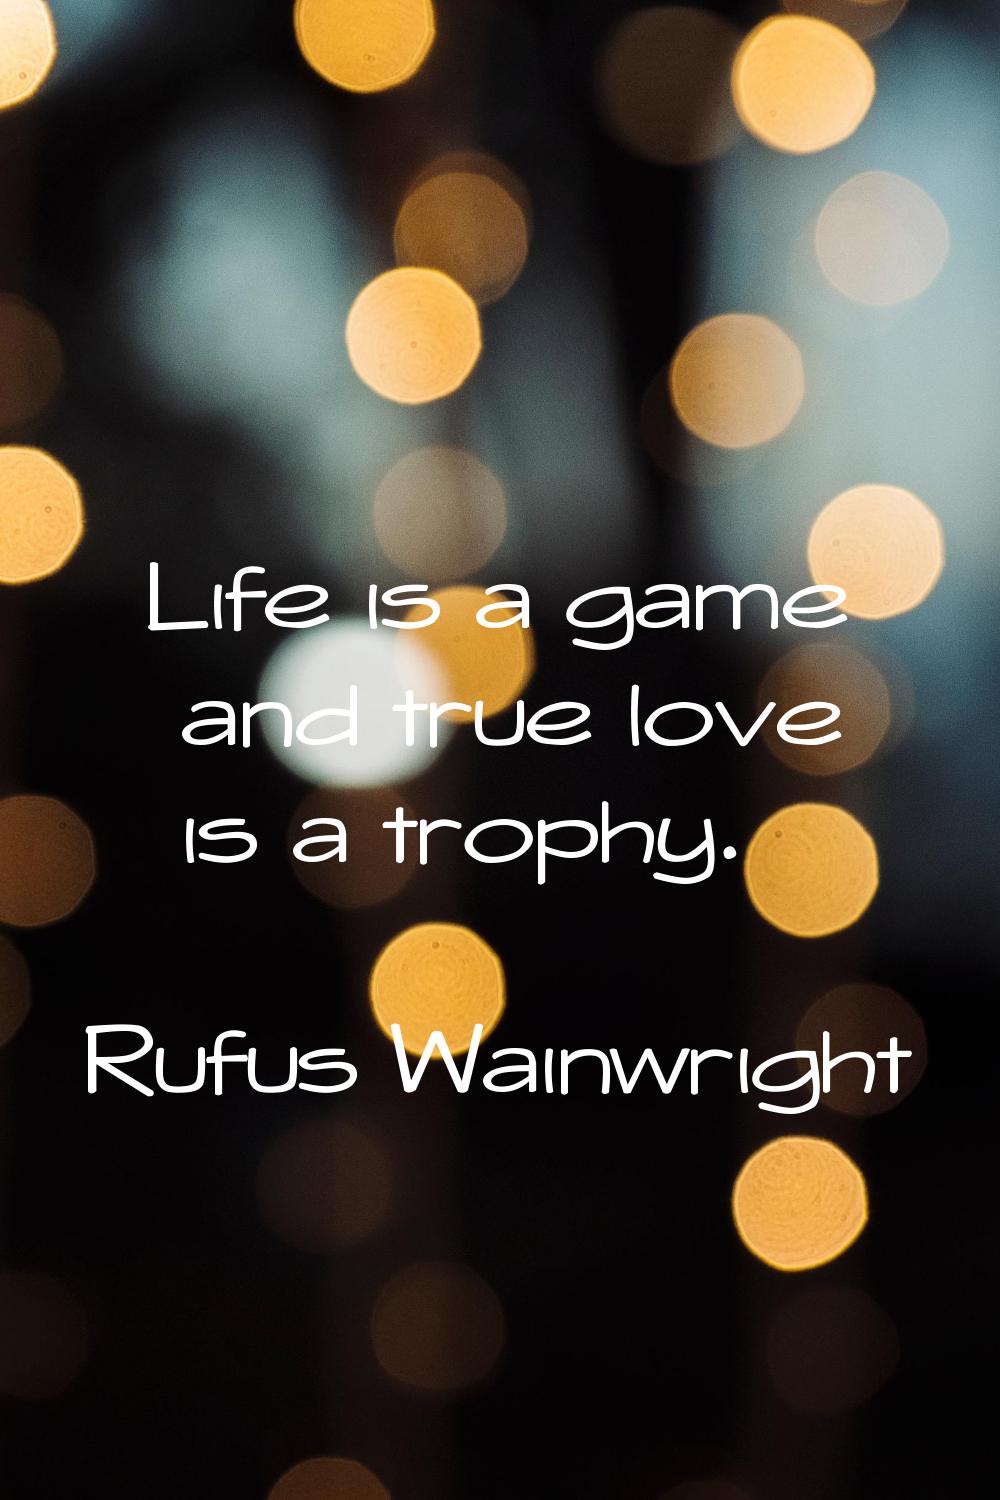 Life is a game and true love is a trophy.